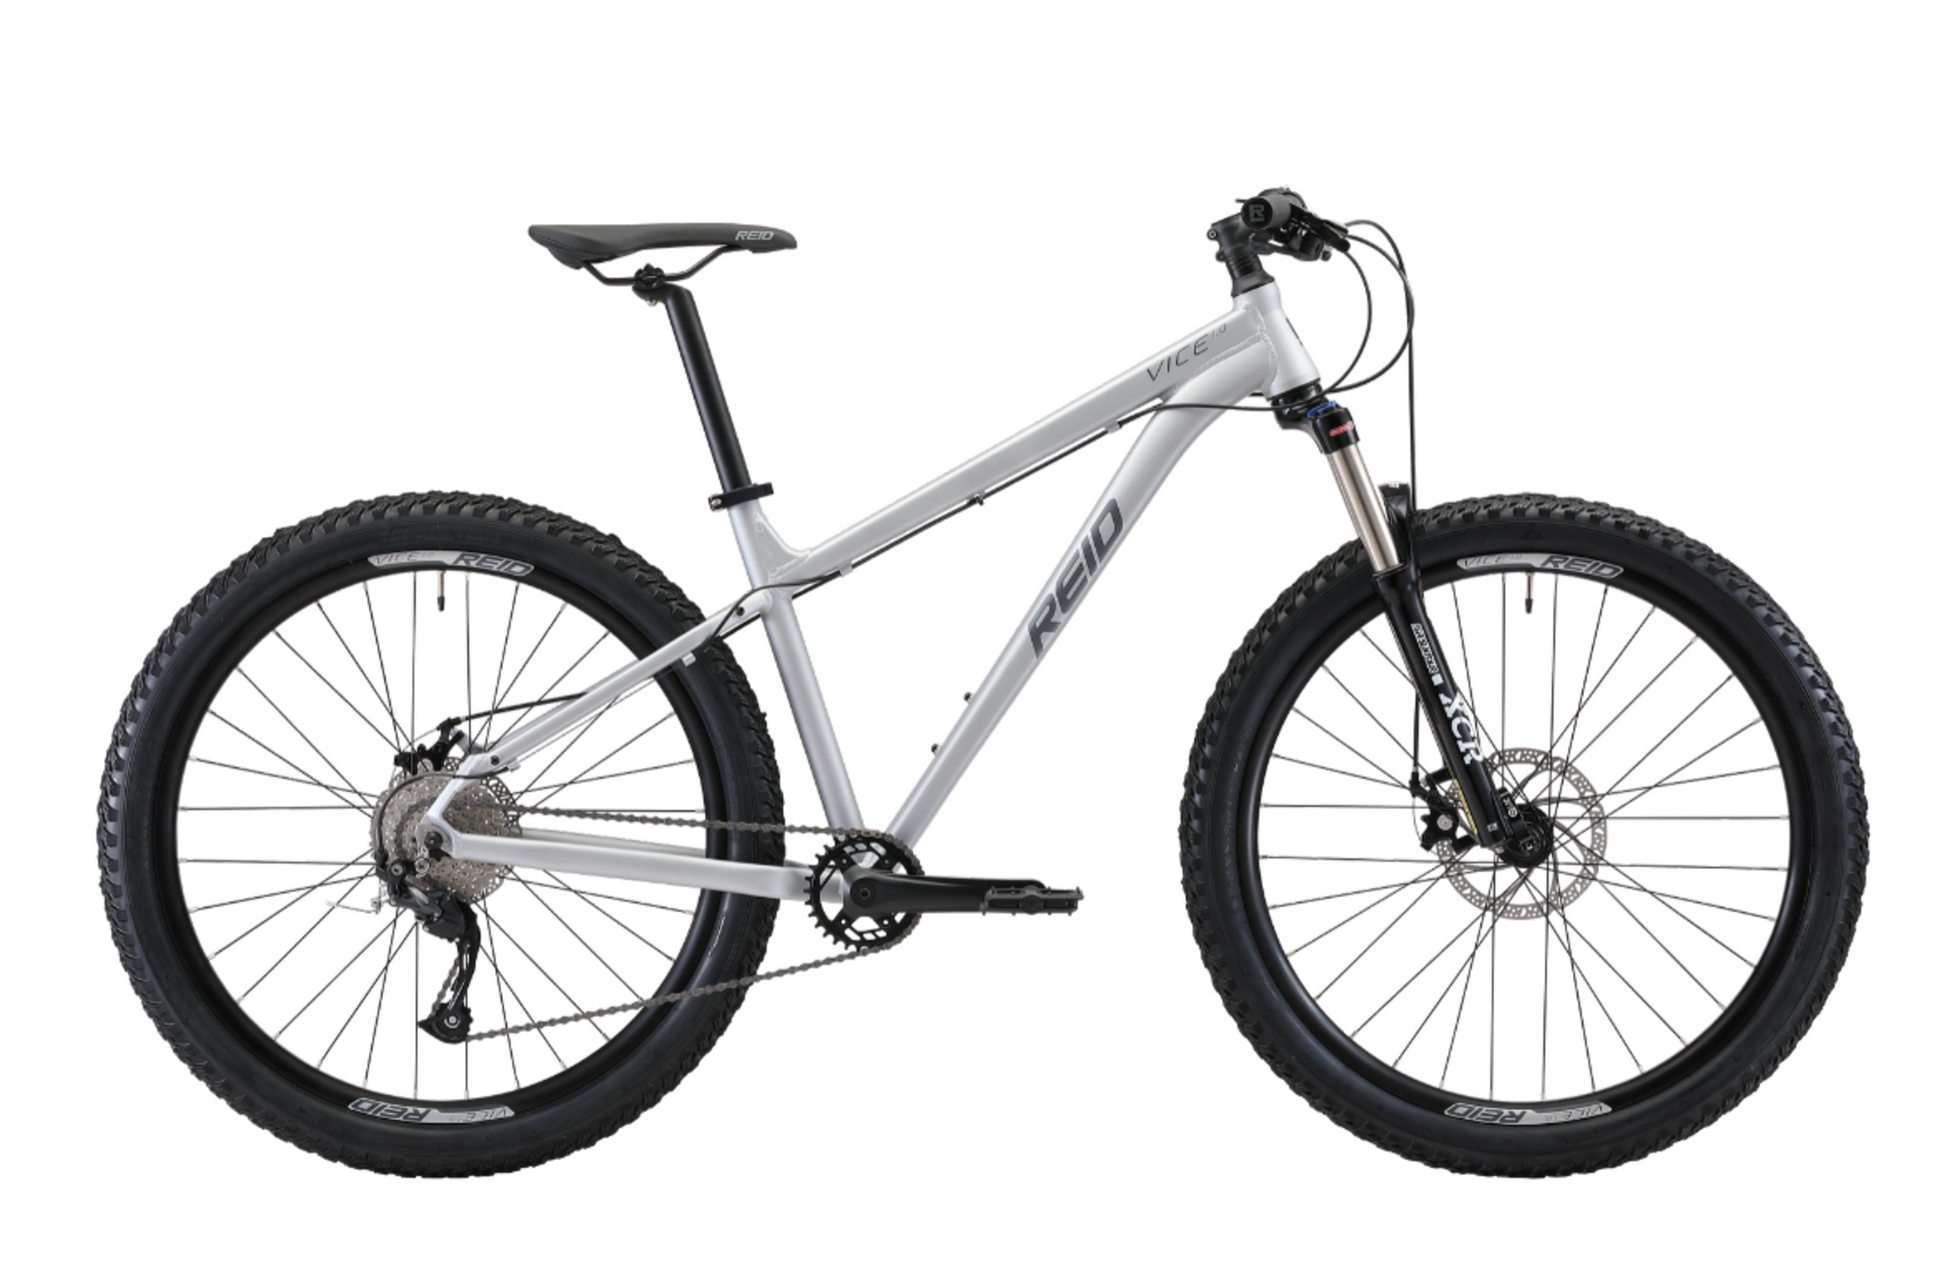 Vice 1.0 Mountain Bike in Grey with 9-speed gearing and 27.5 Plus tyres from Reid Cycles Australia 